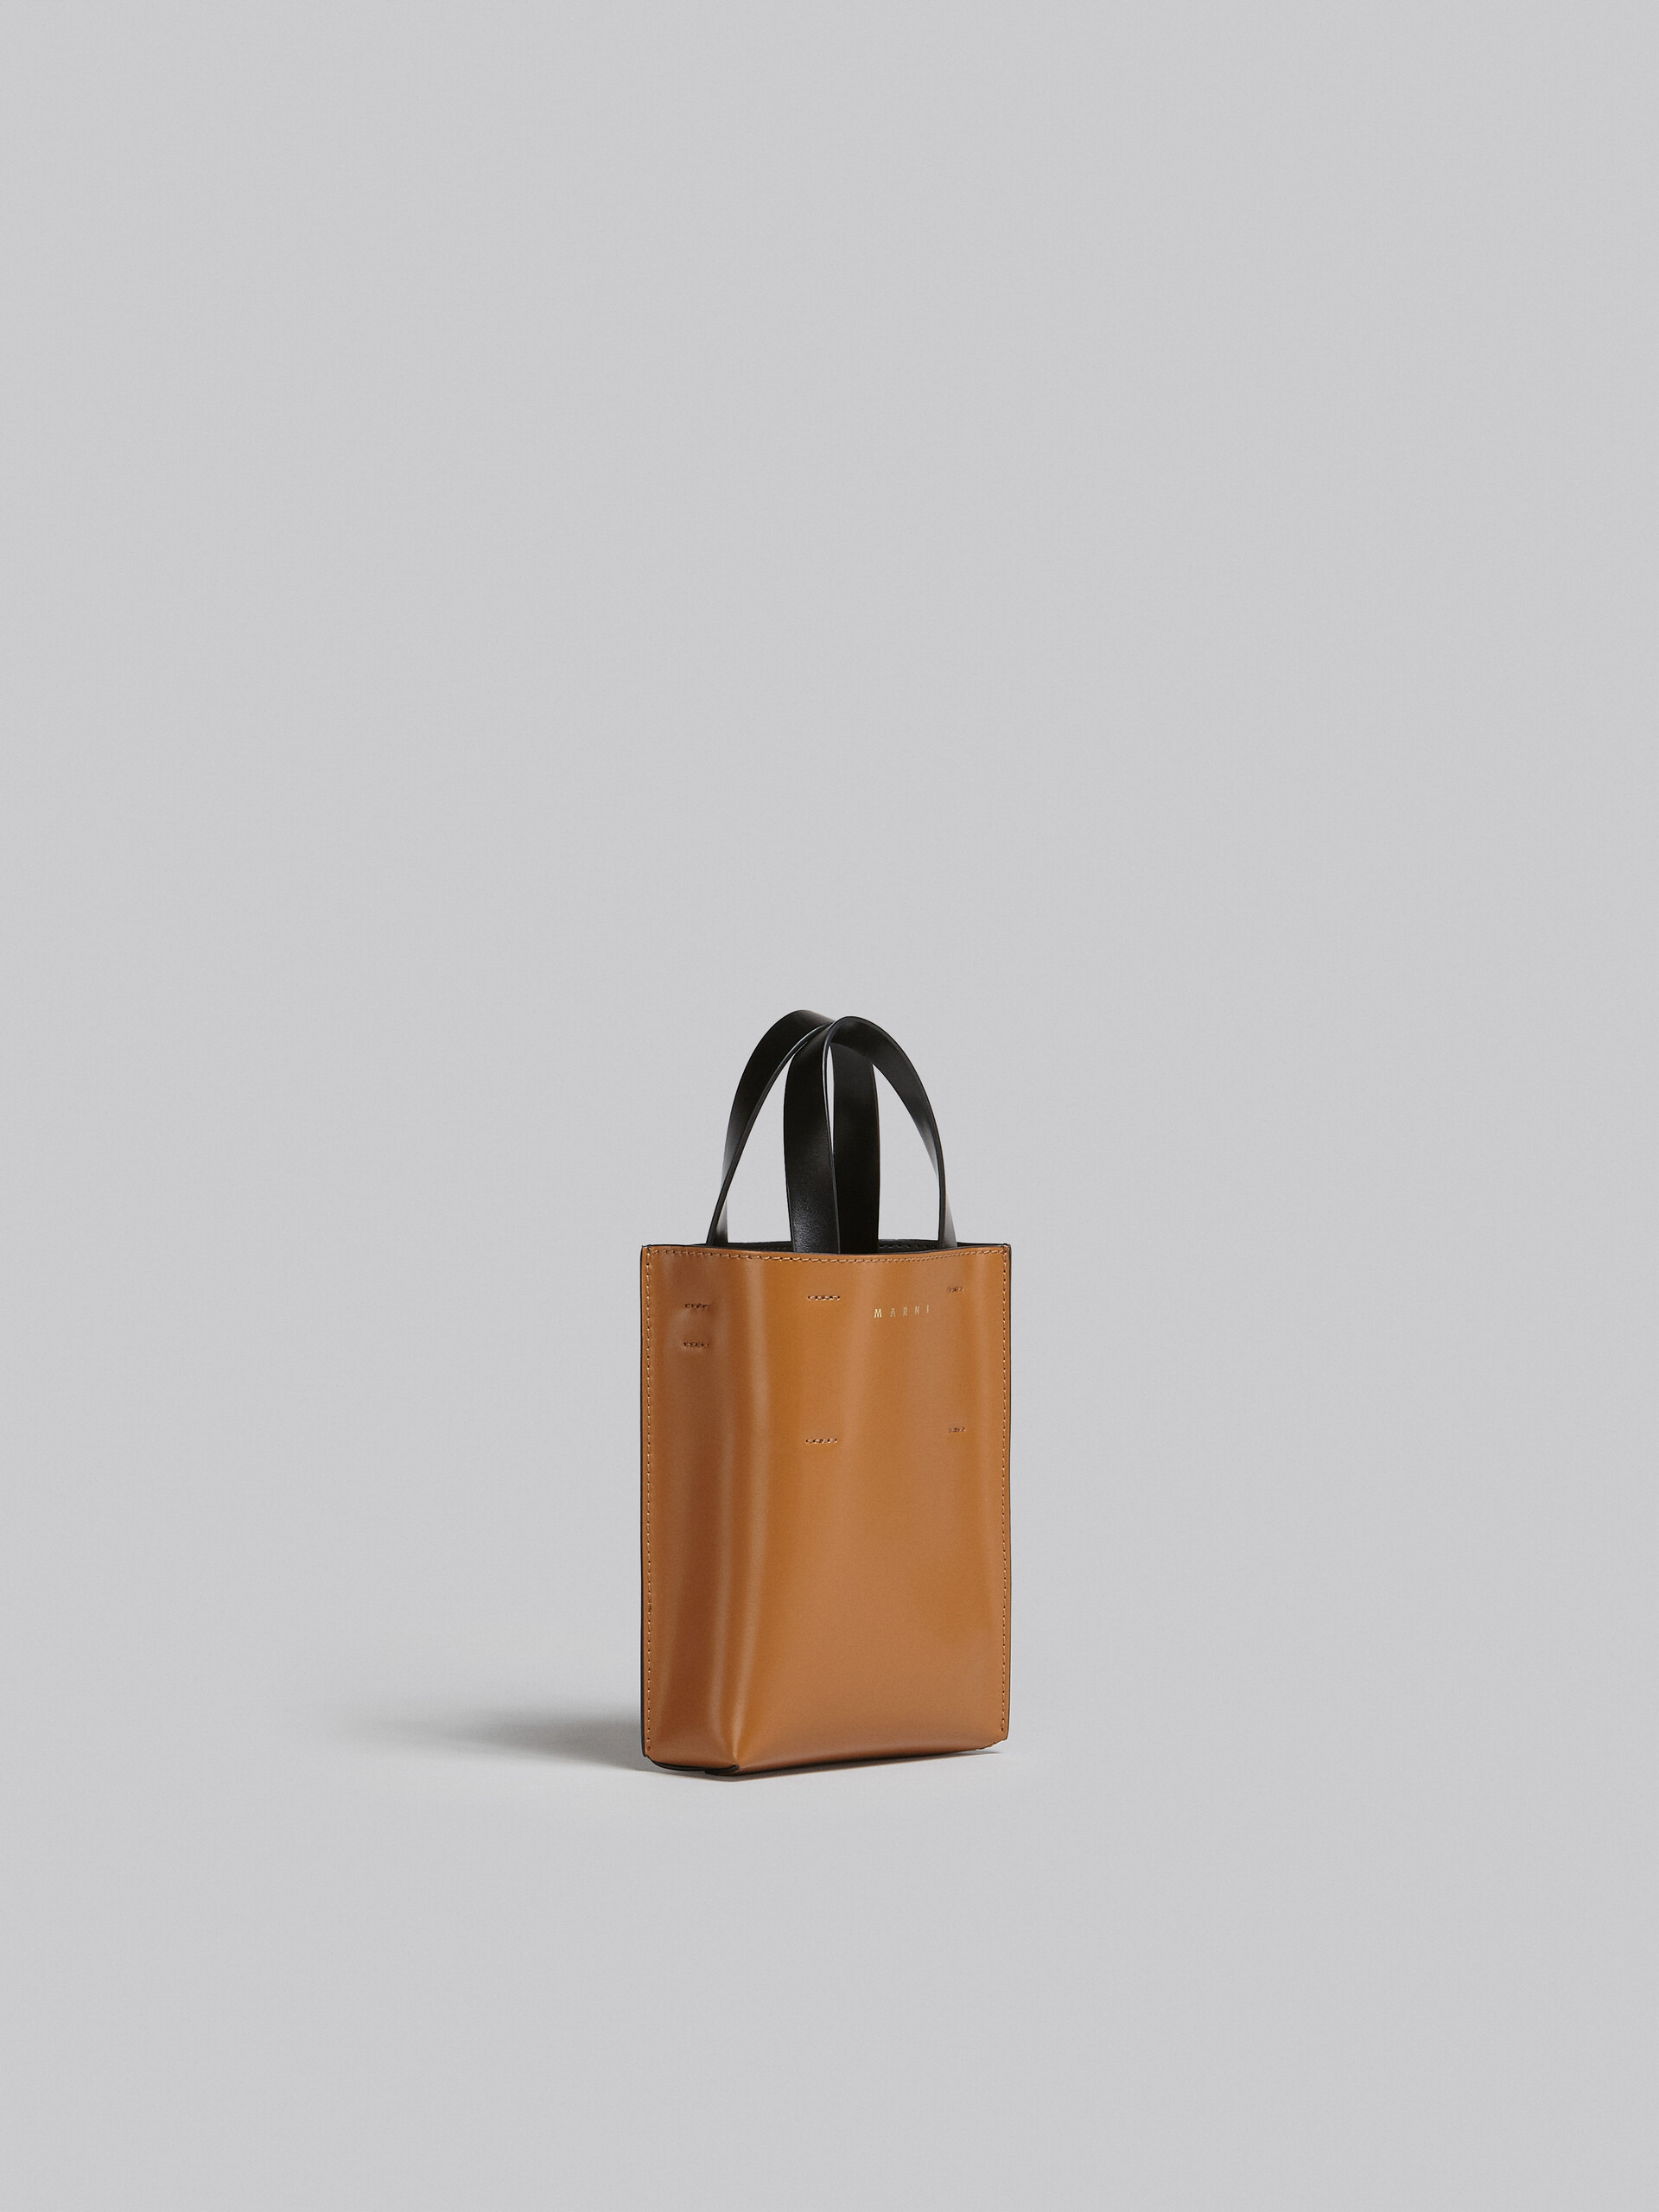 MUSEO nano bag in black shiny leather - Shopping Bags - Image 6